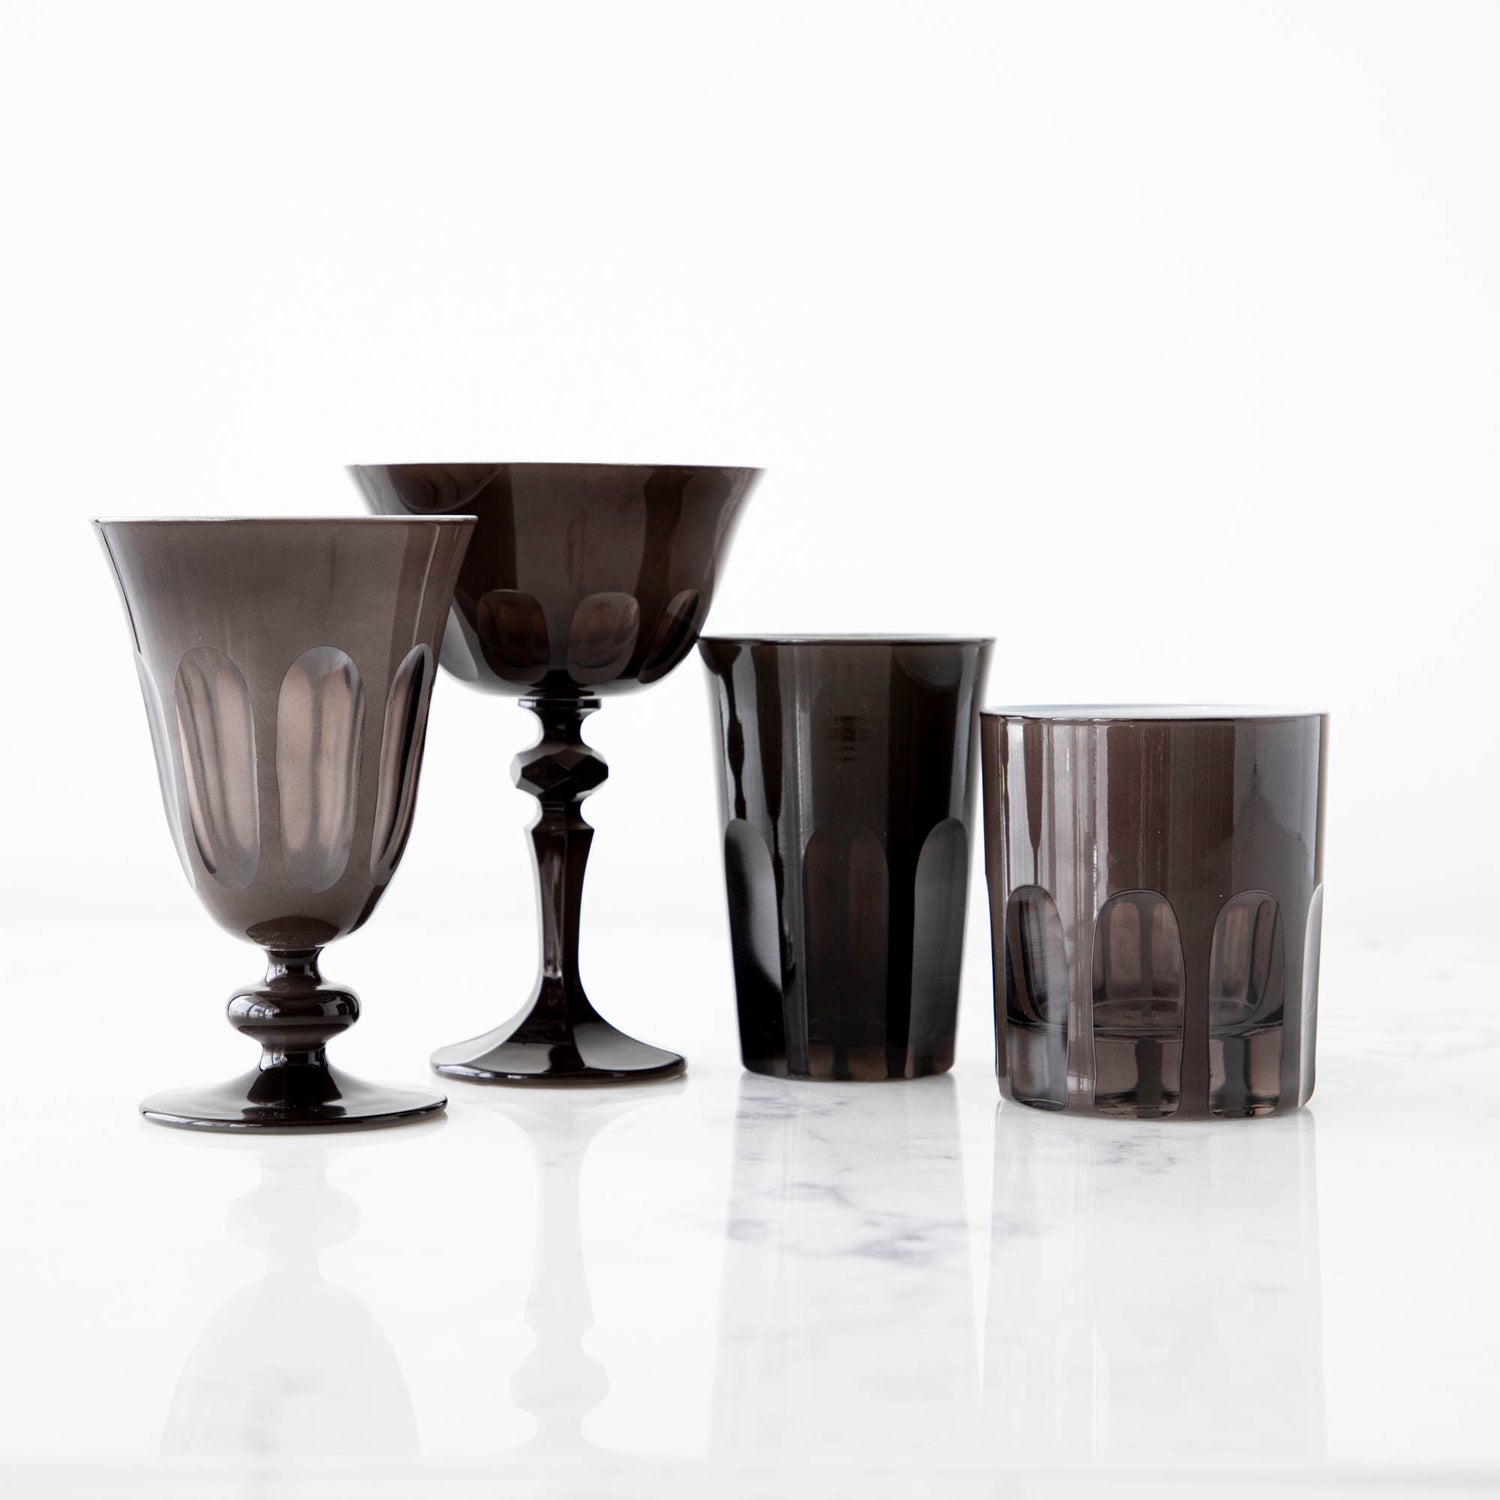 A set of three SIR/MADAM Rialto Warm Gray Glasses of varying styles on a marble surface.